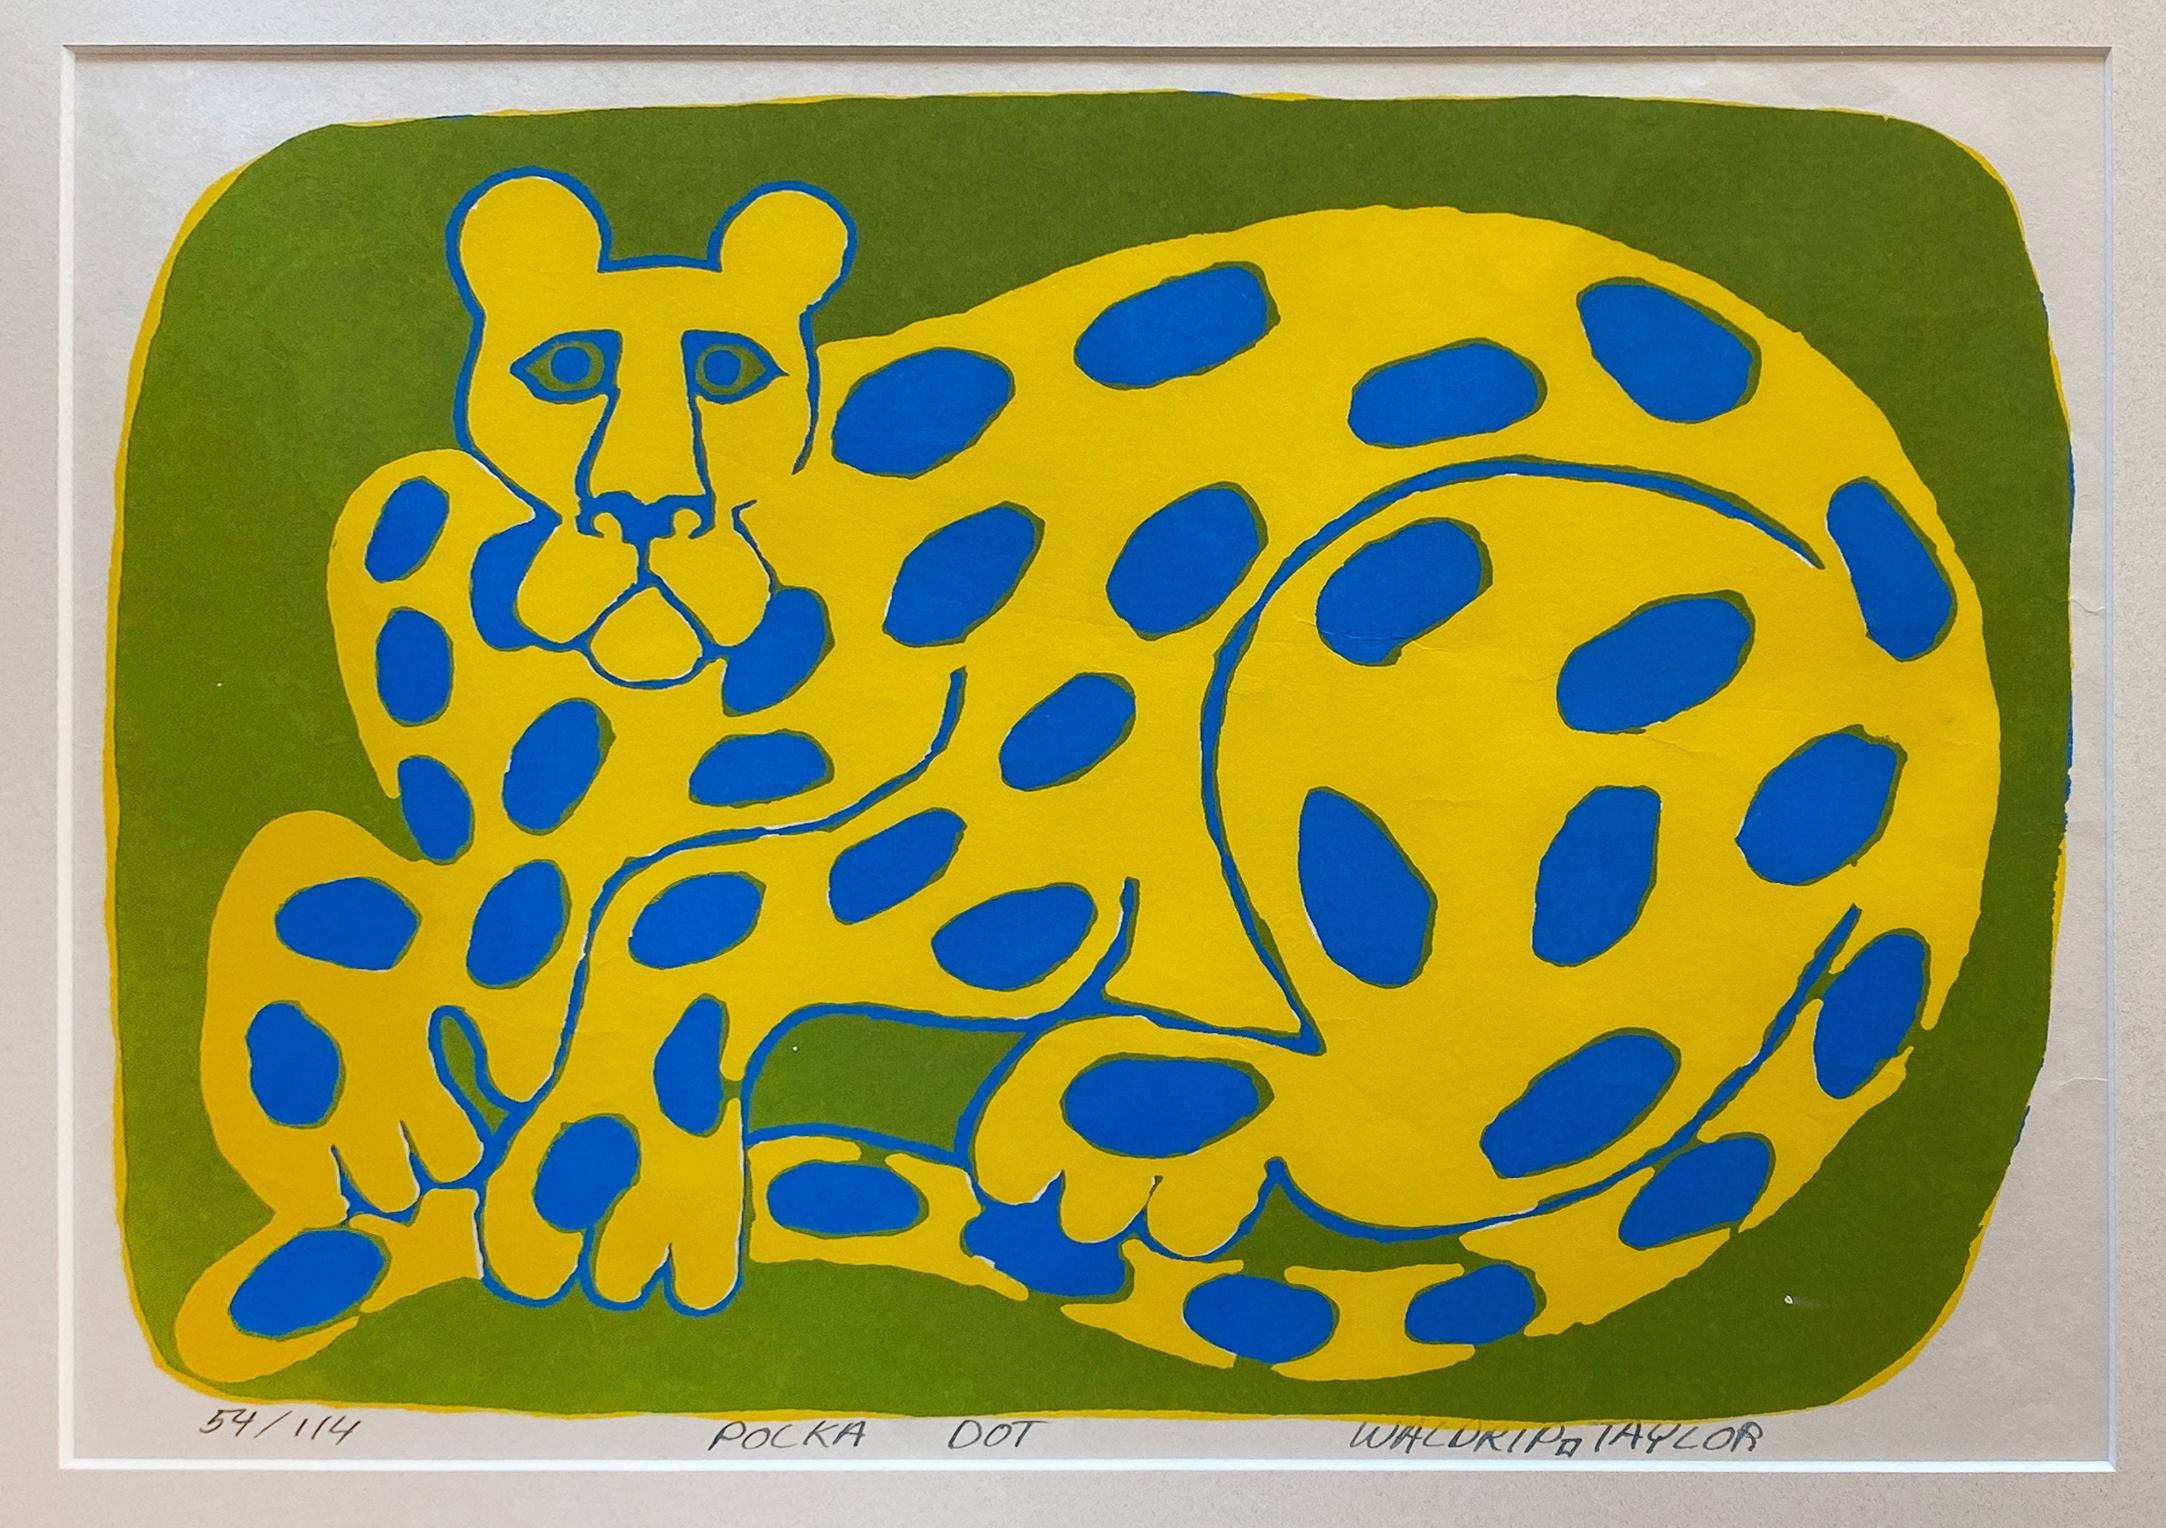 This bright yellow whimsical leopard with blue polka dots is set against a lime green background and stares directly out inviting the viewer to interact with him. This silkscreen print by Waldrop Taylor is newly matted and framed in 2021 with